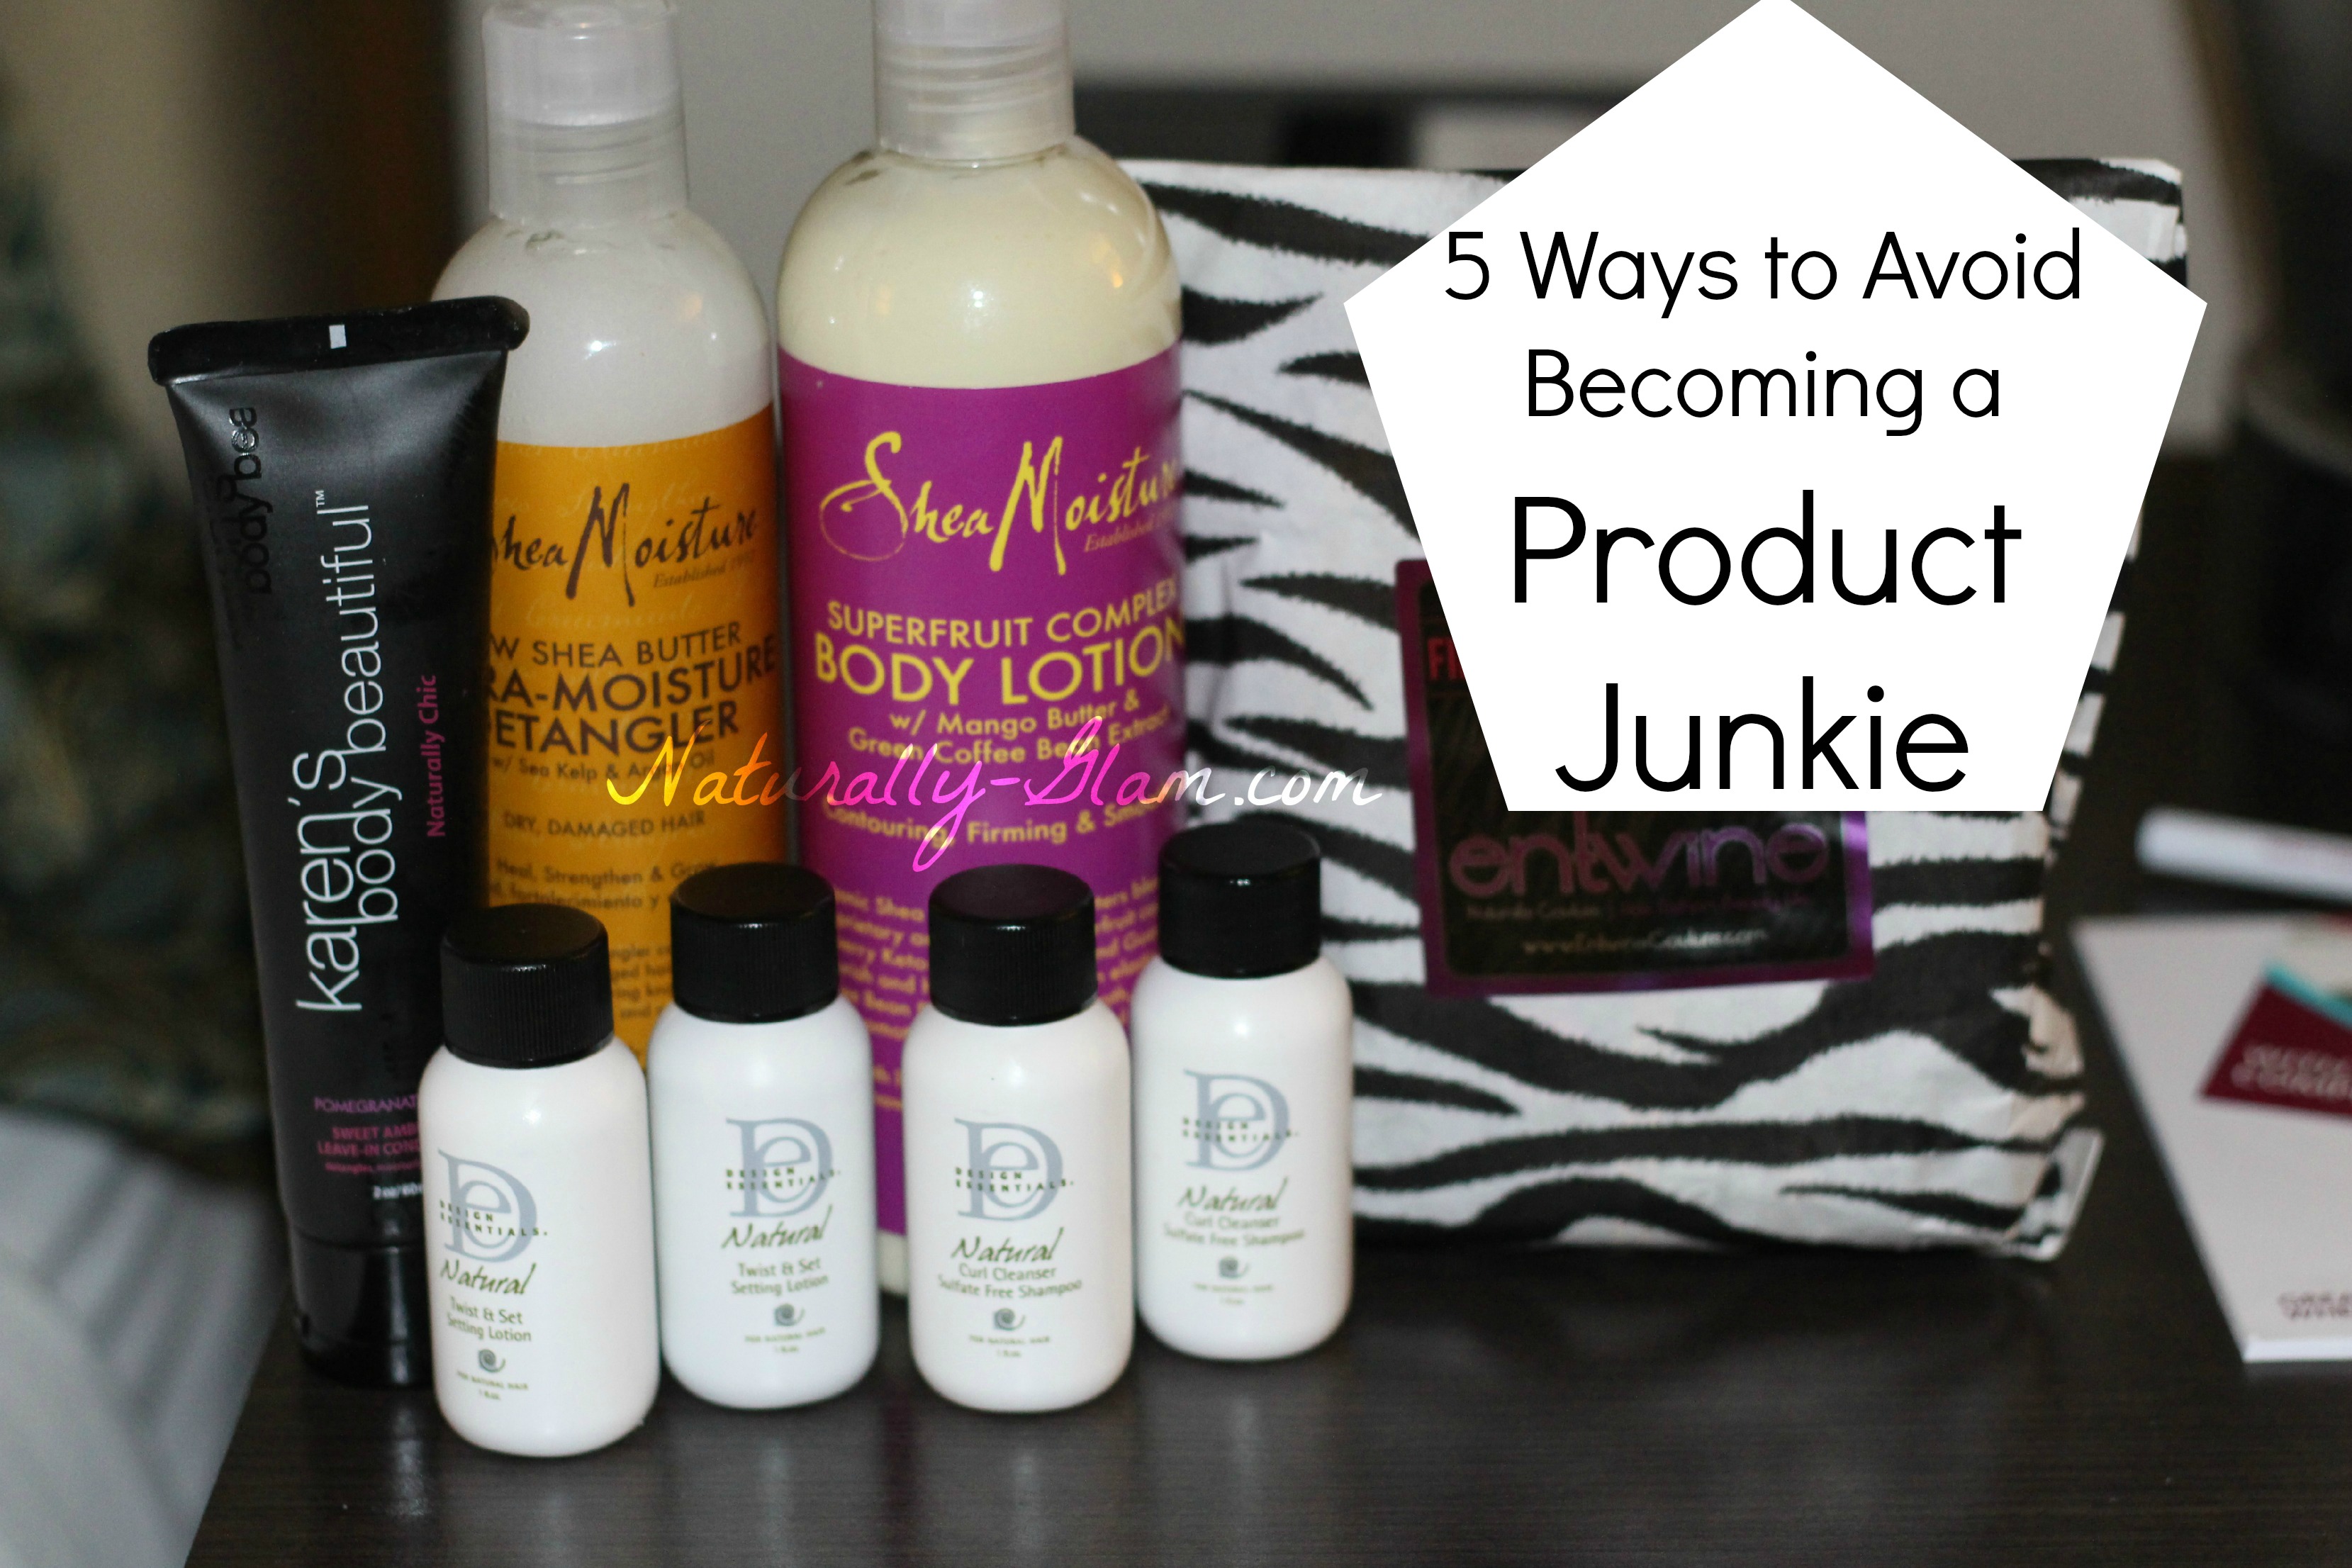 5 Ways to Avoid Becoming a Product Junkie